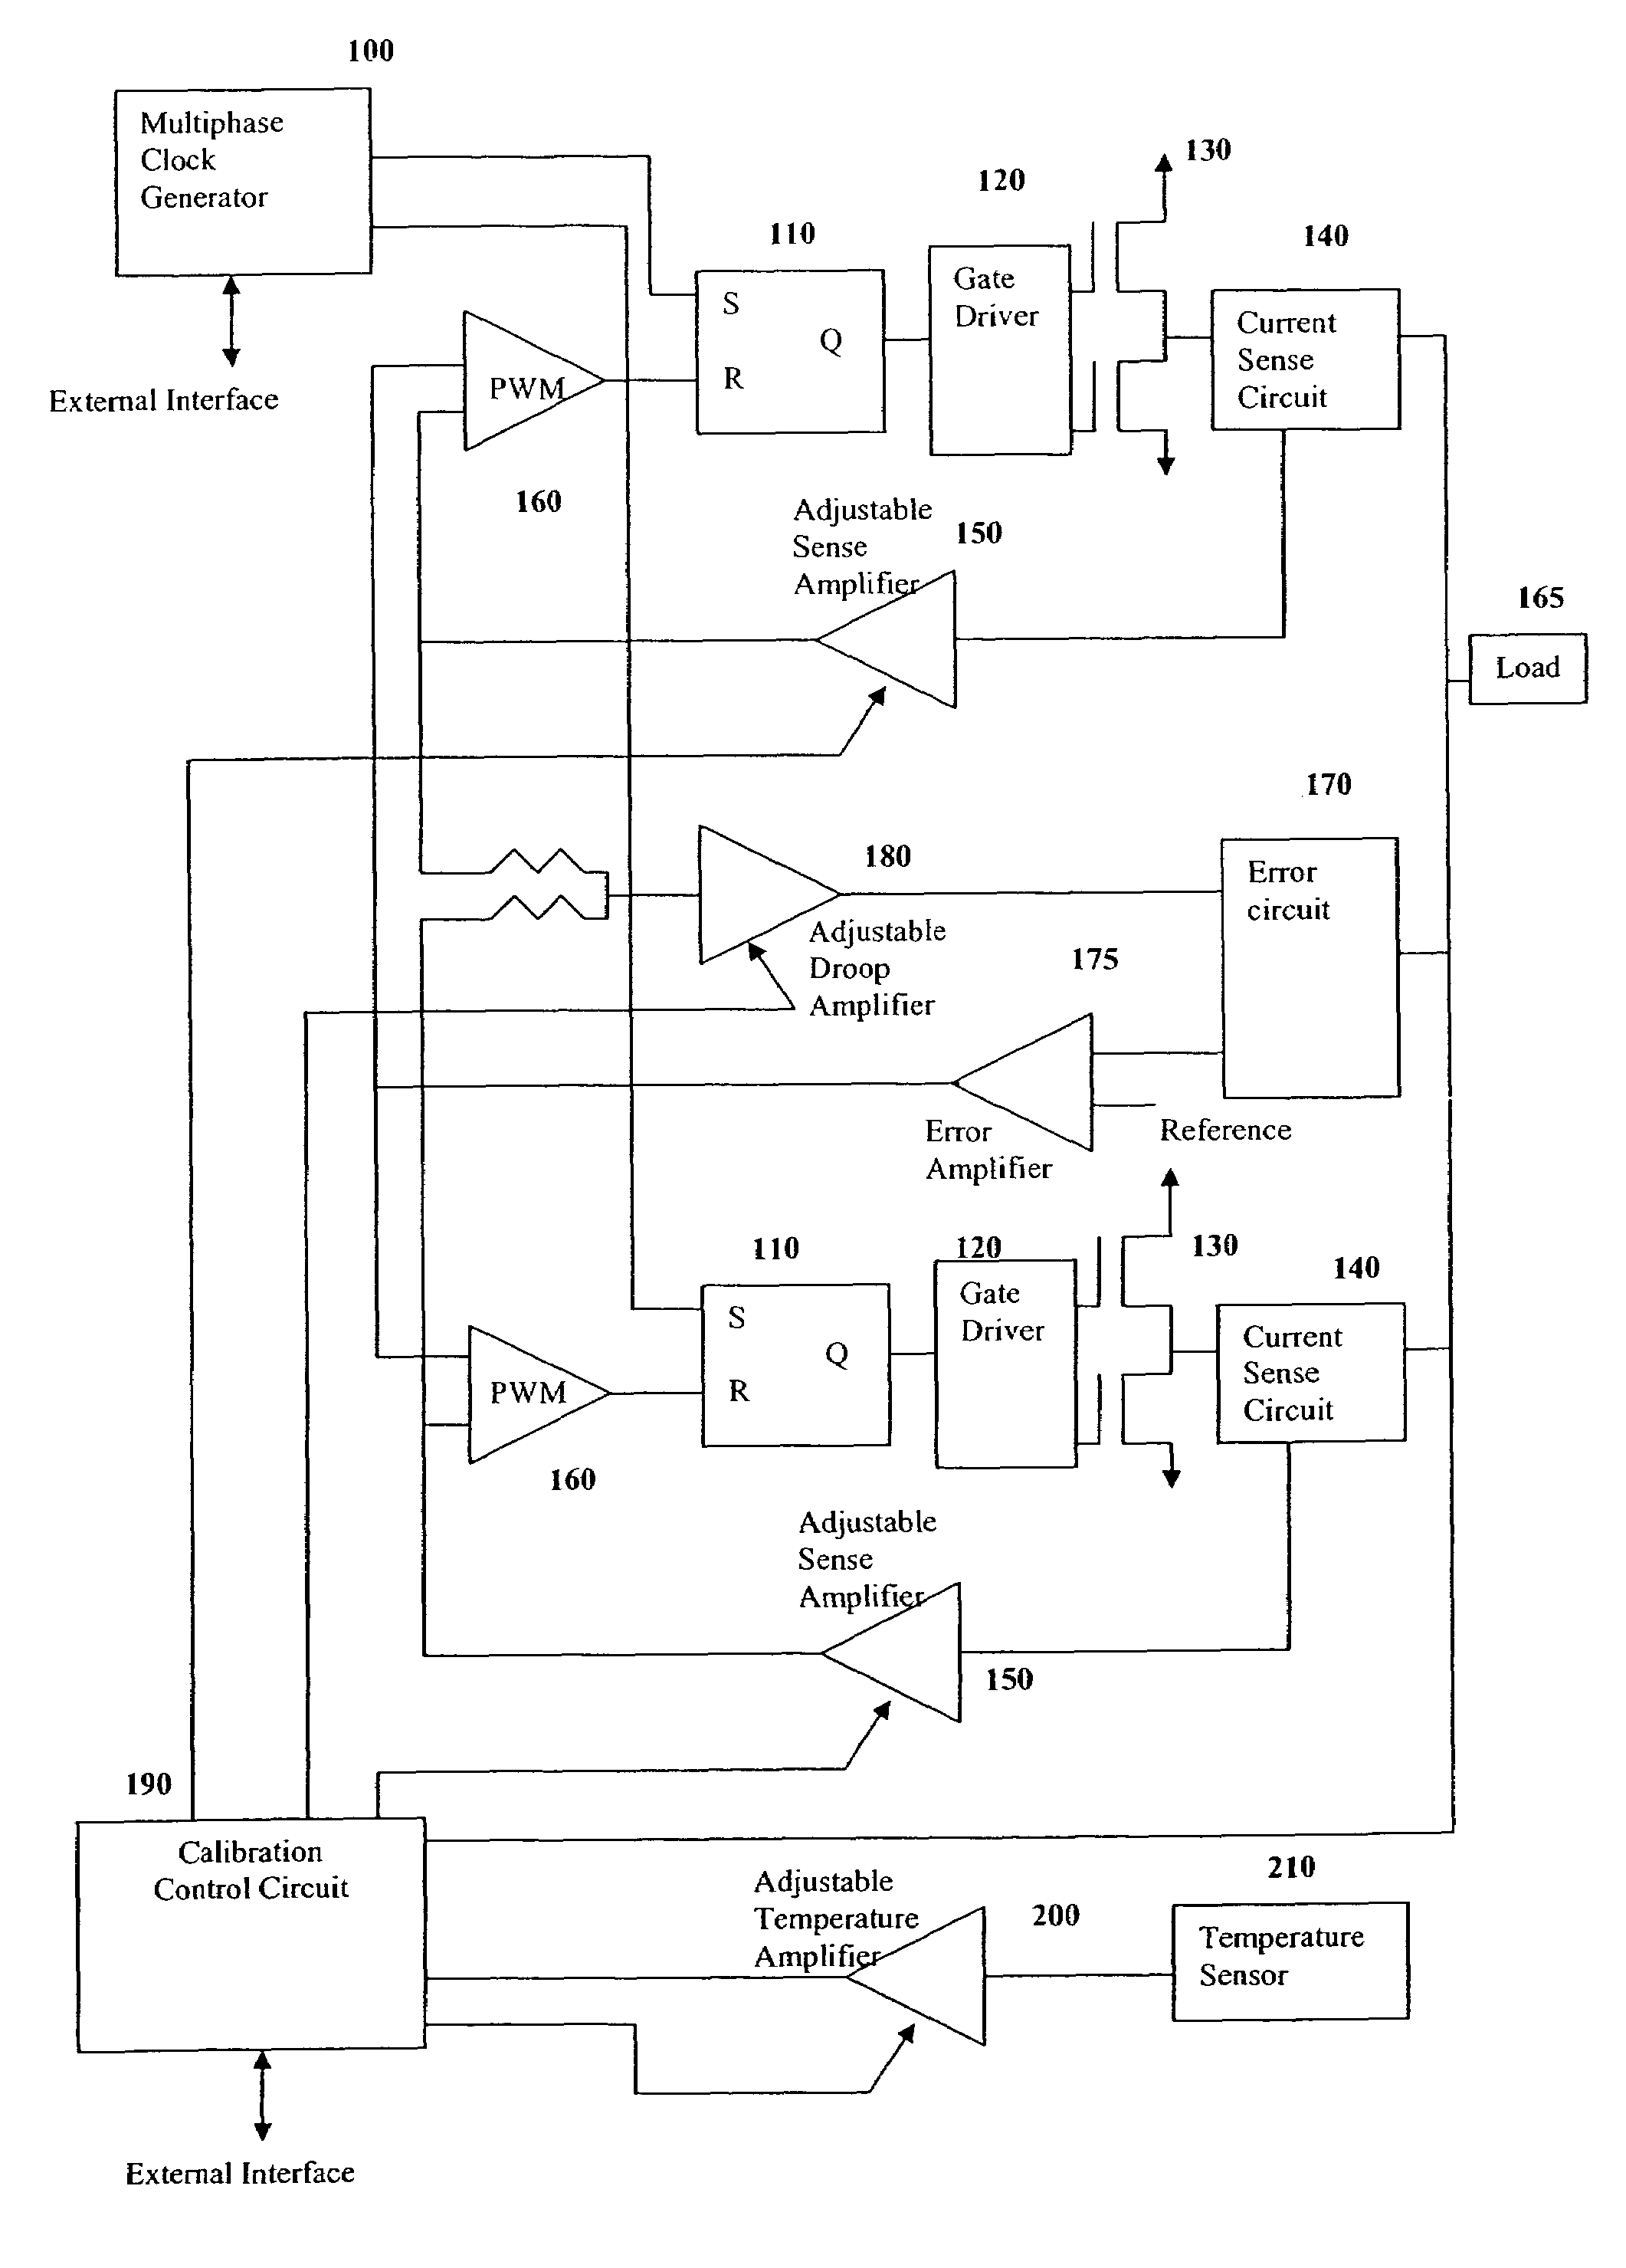 Programmable calibration circuit for power supply current sensing and droop loss compensation